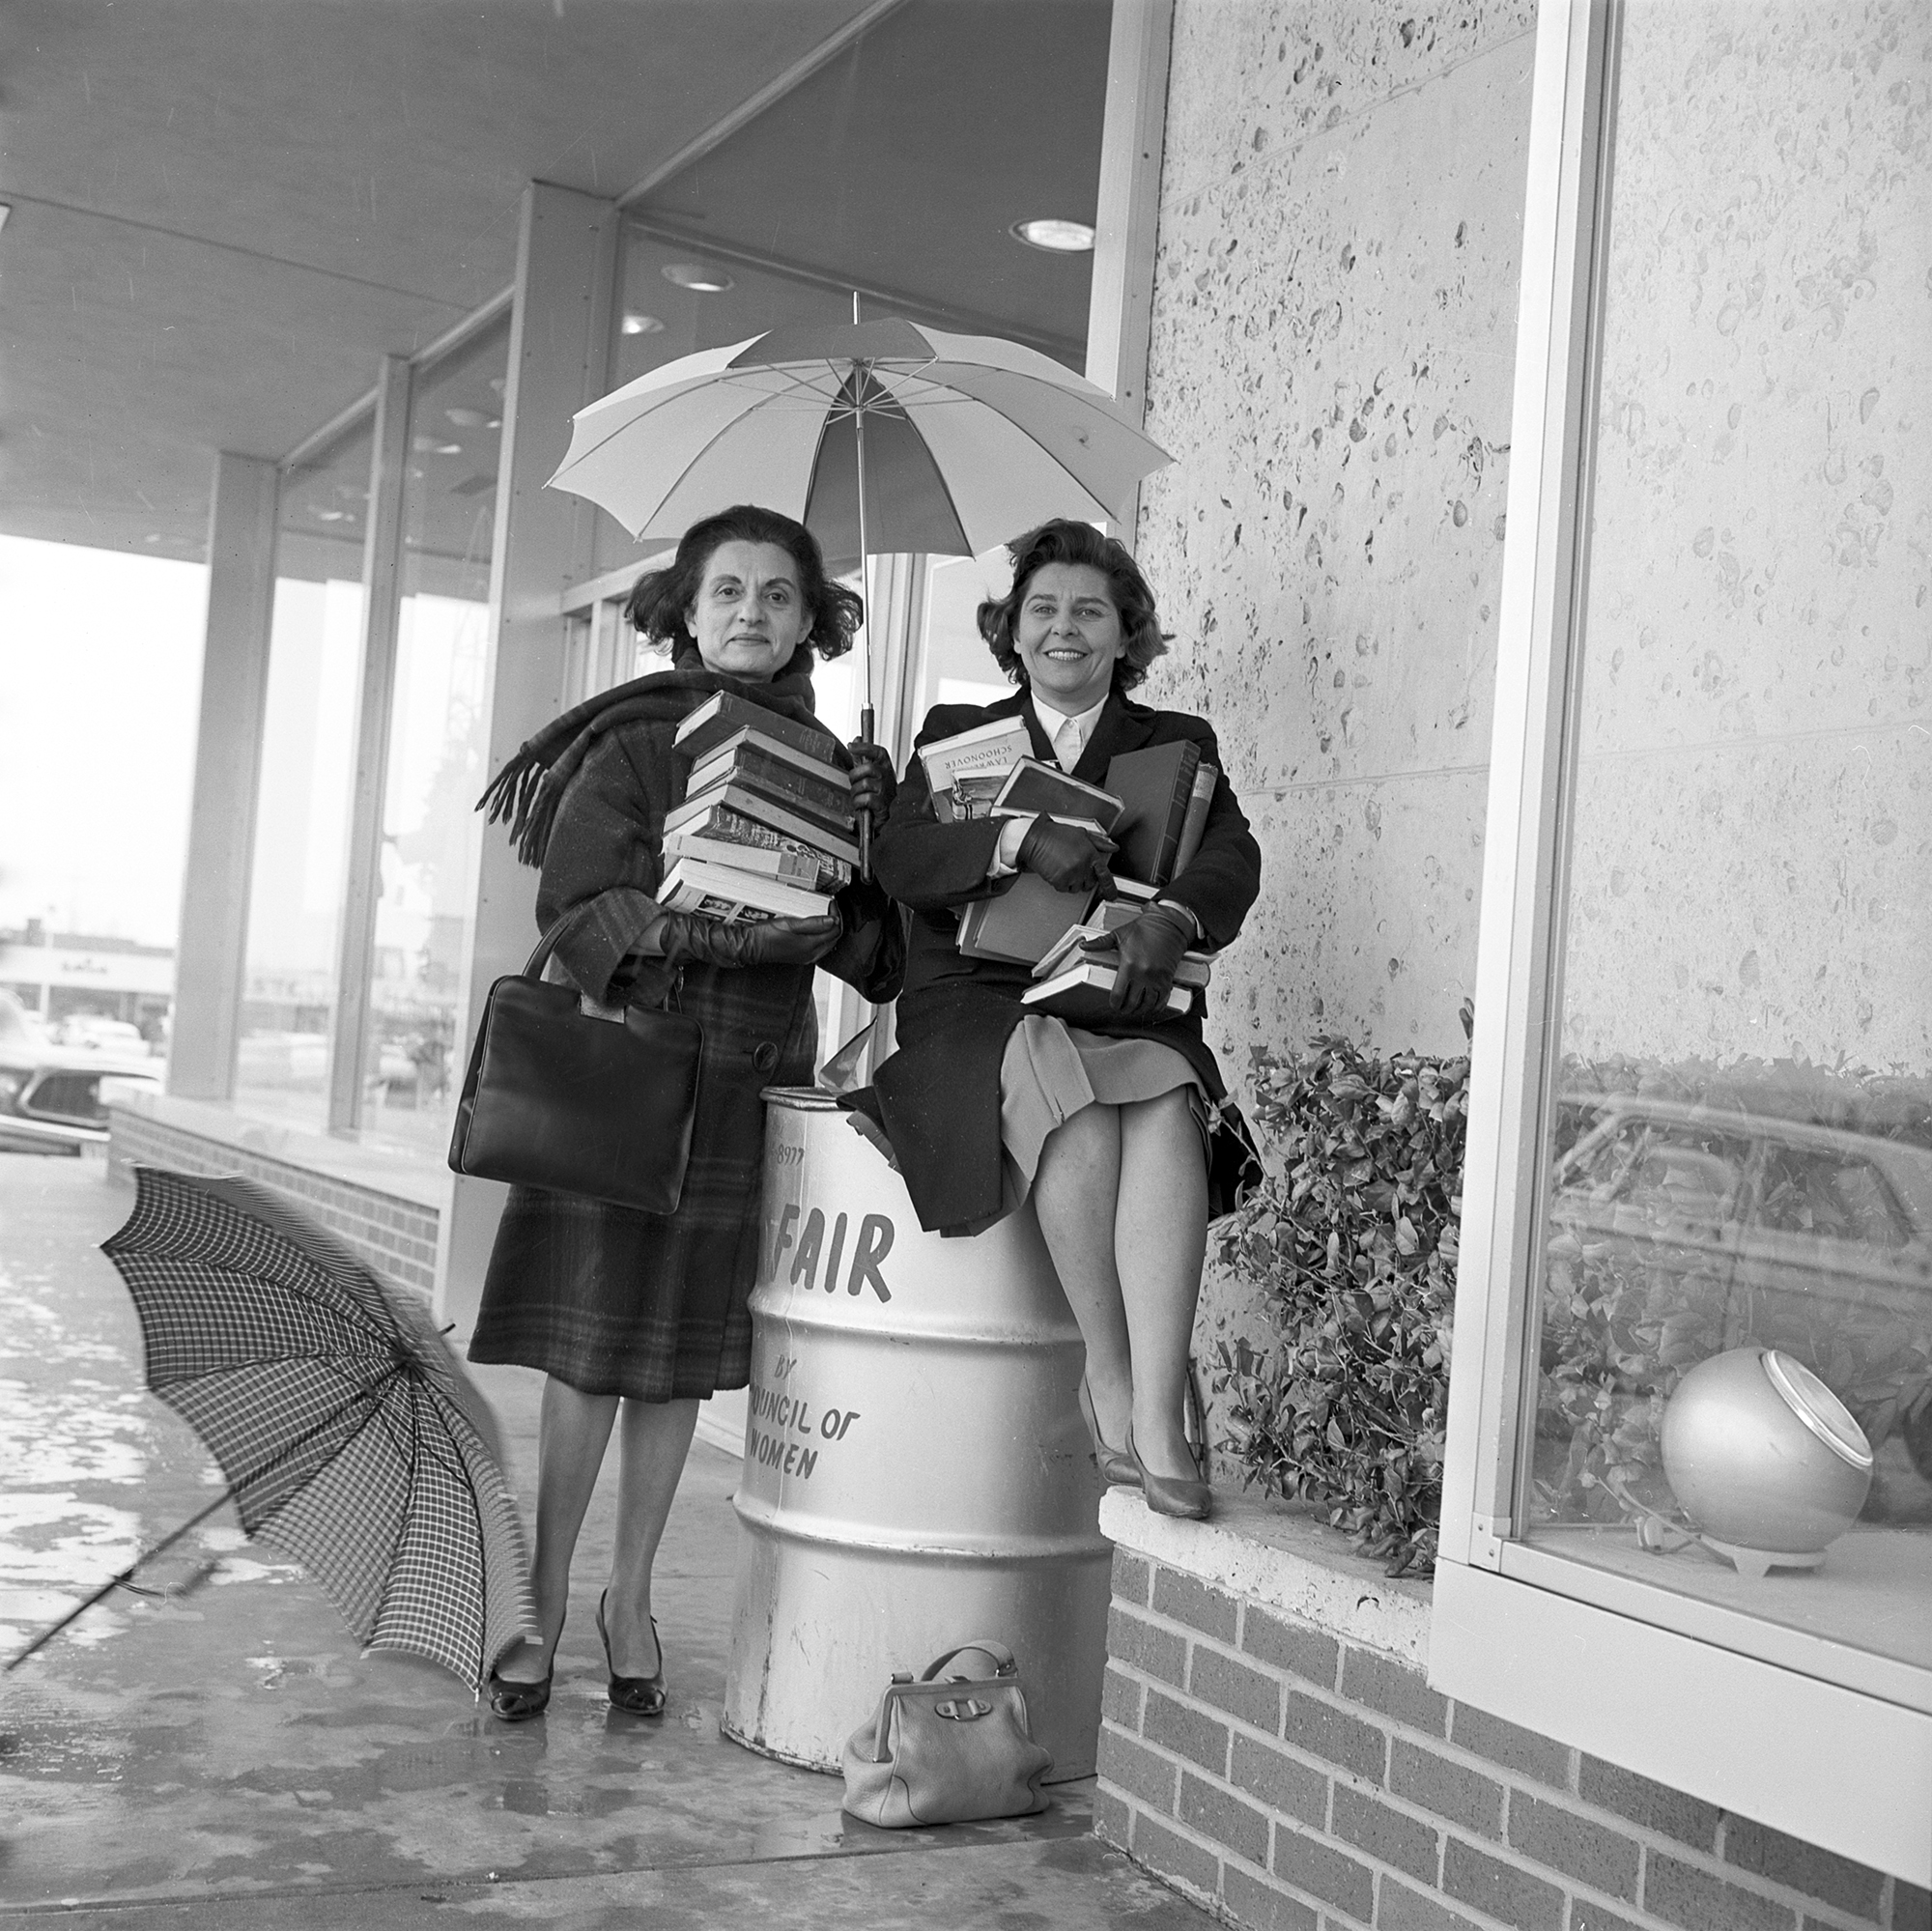 Photo of two women holding large stacks of books while they are positioned under an umbrella and perched on and next to a book barrel.